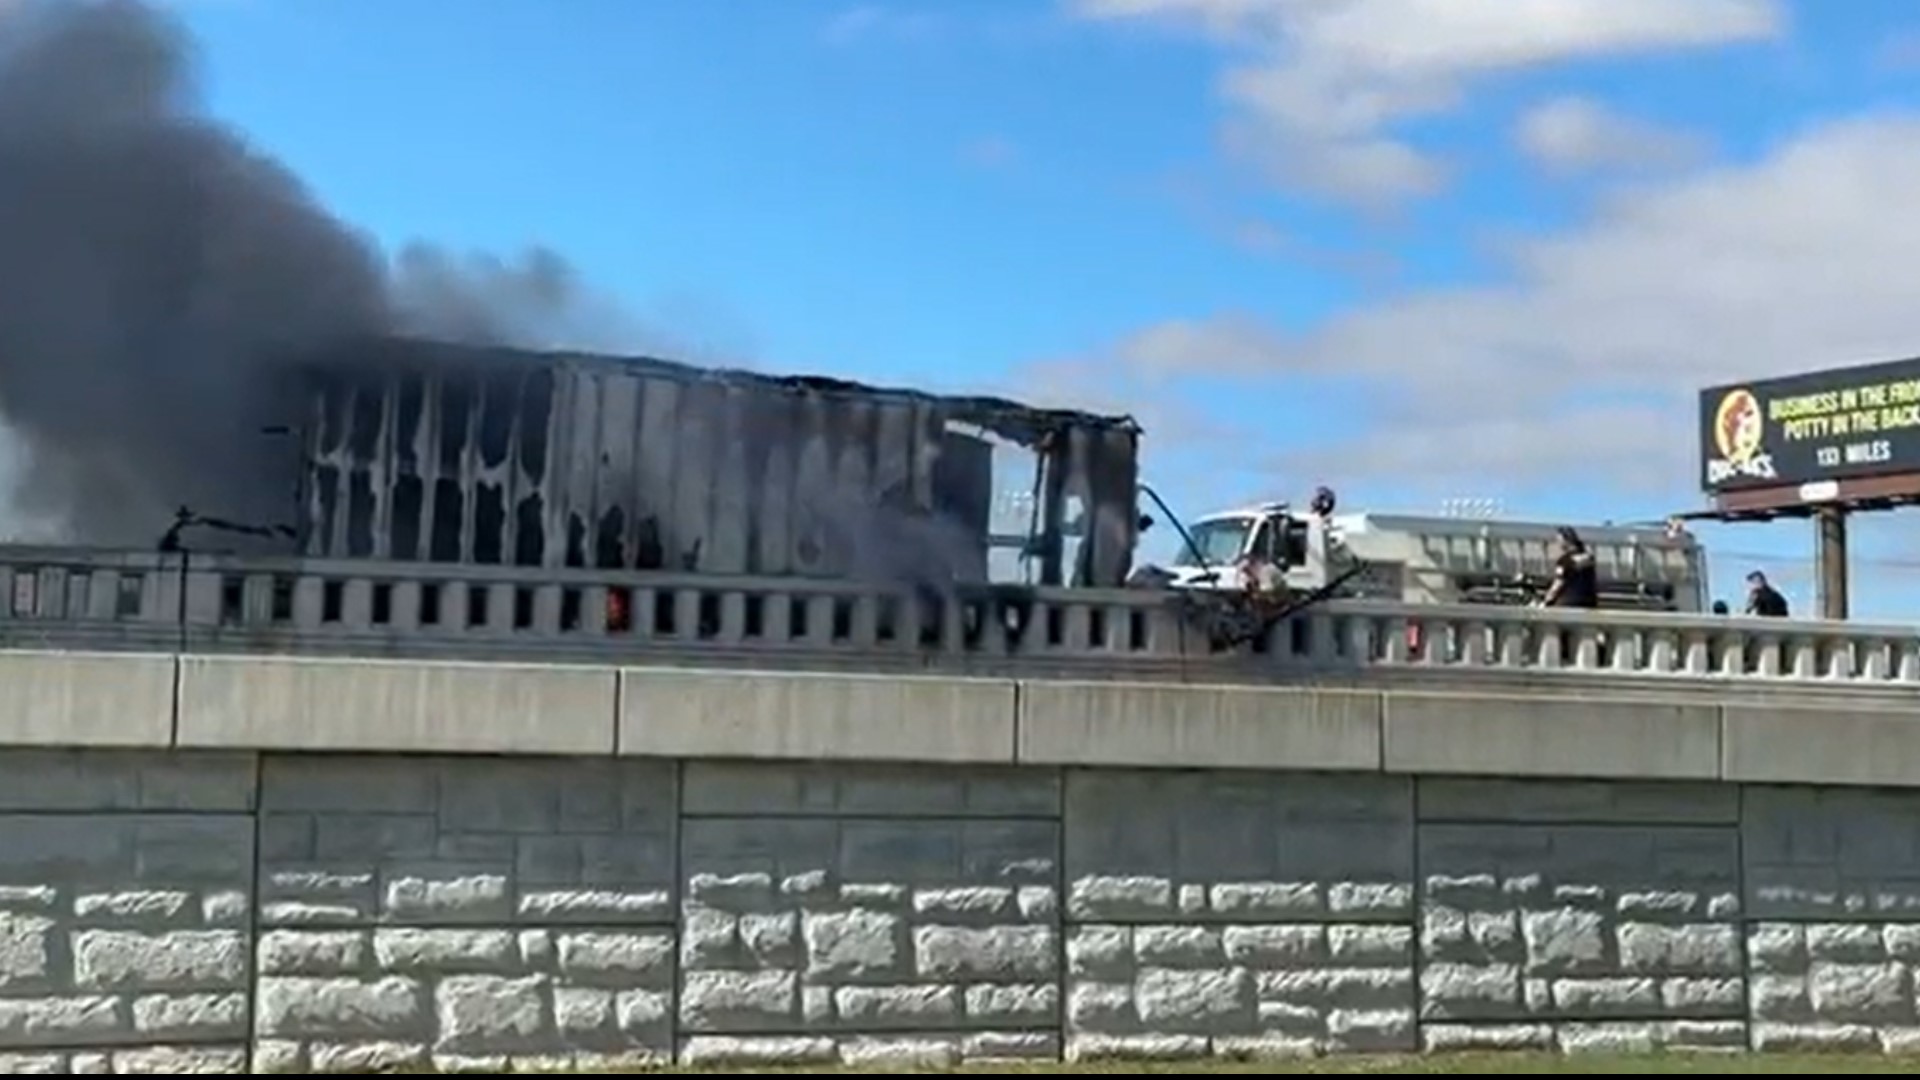 Video sent in from a 6 News viewer shows the big blaze coming from I-35 northbound lanes.